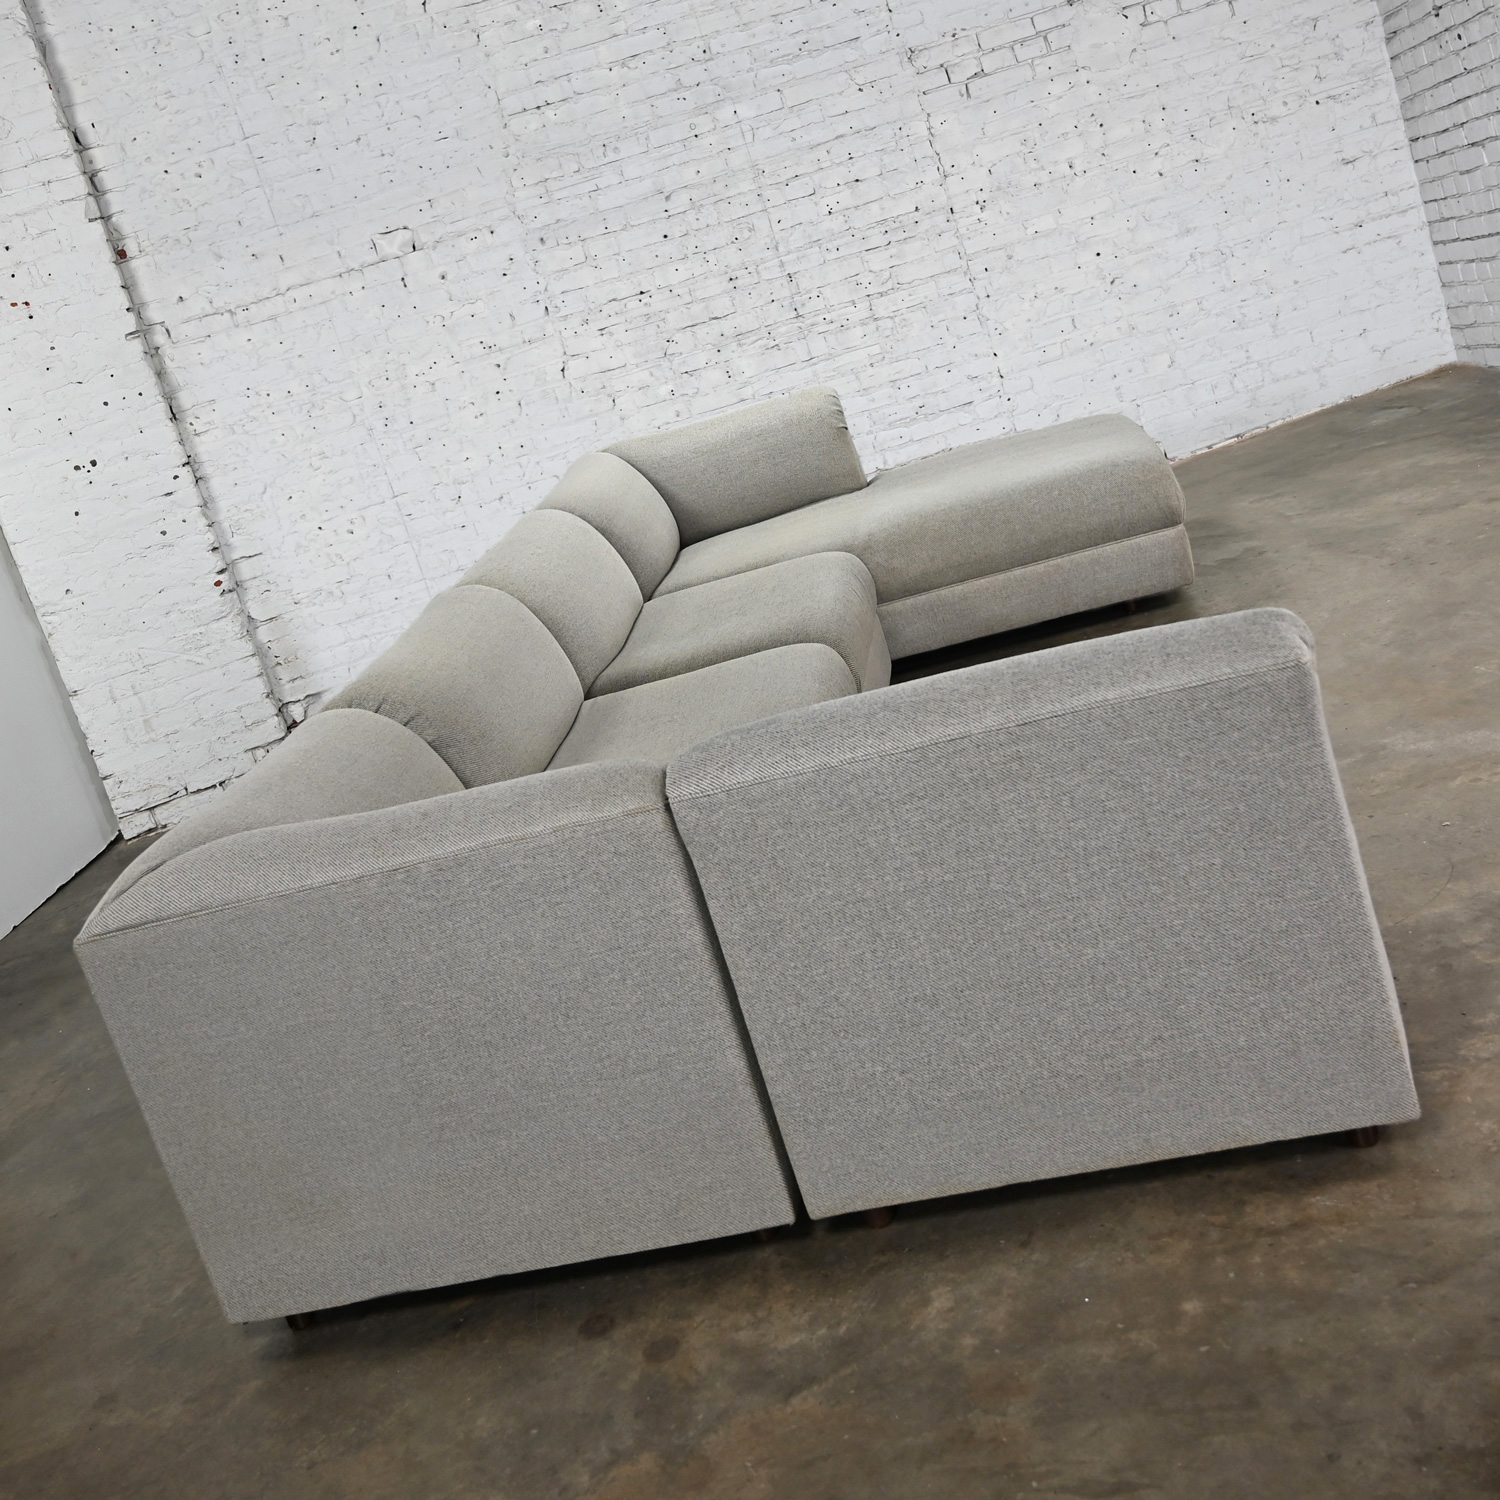 Late 20th Century Modern Modular Sectional Sofa 5 Pieces with Chaise Gray Tweed Fabric